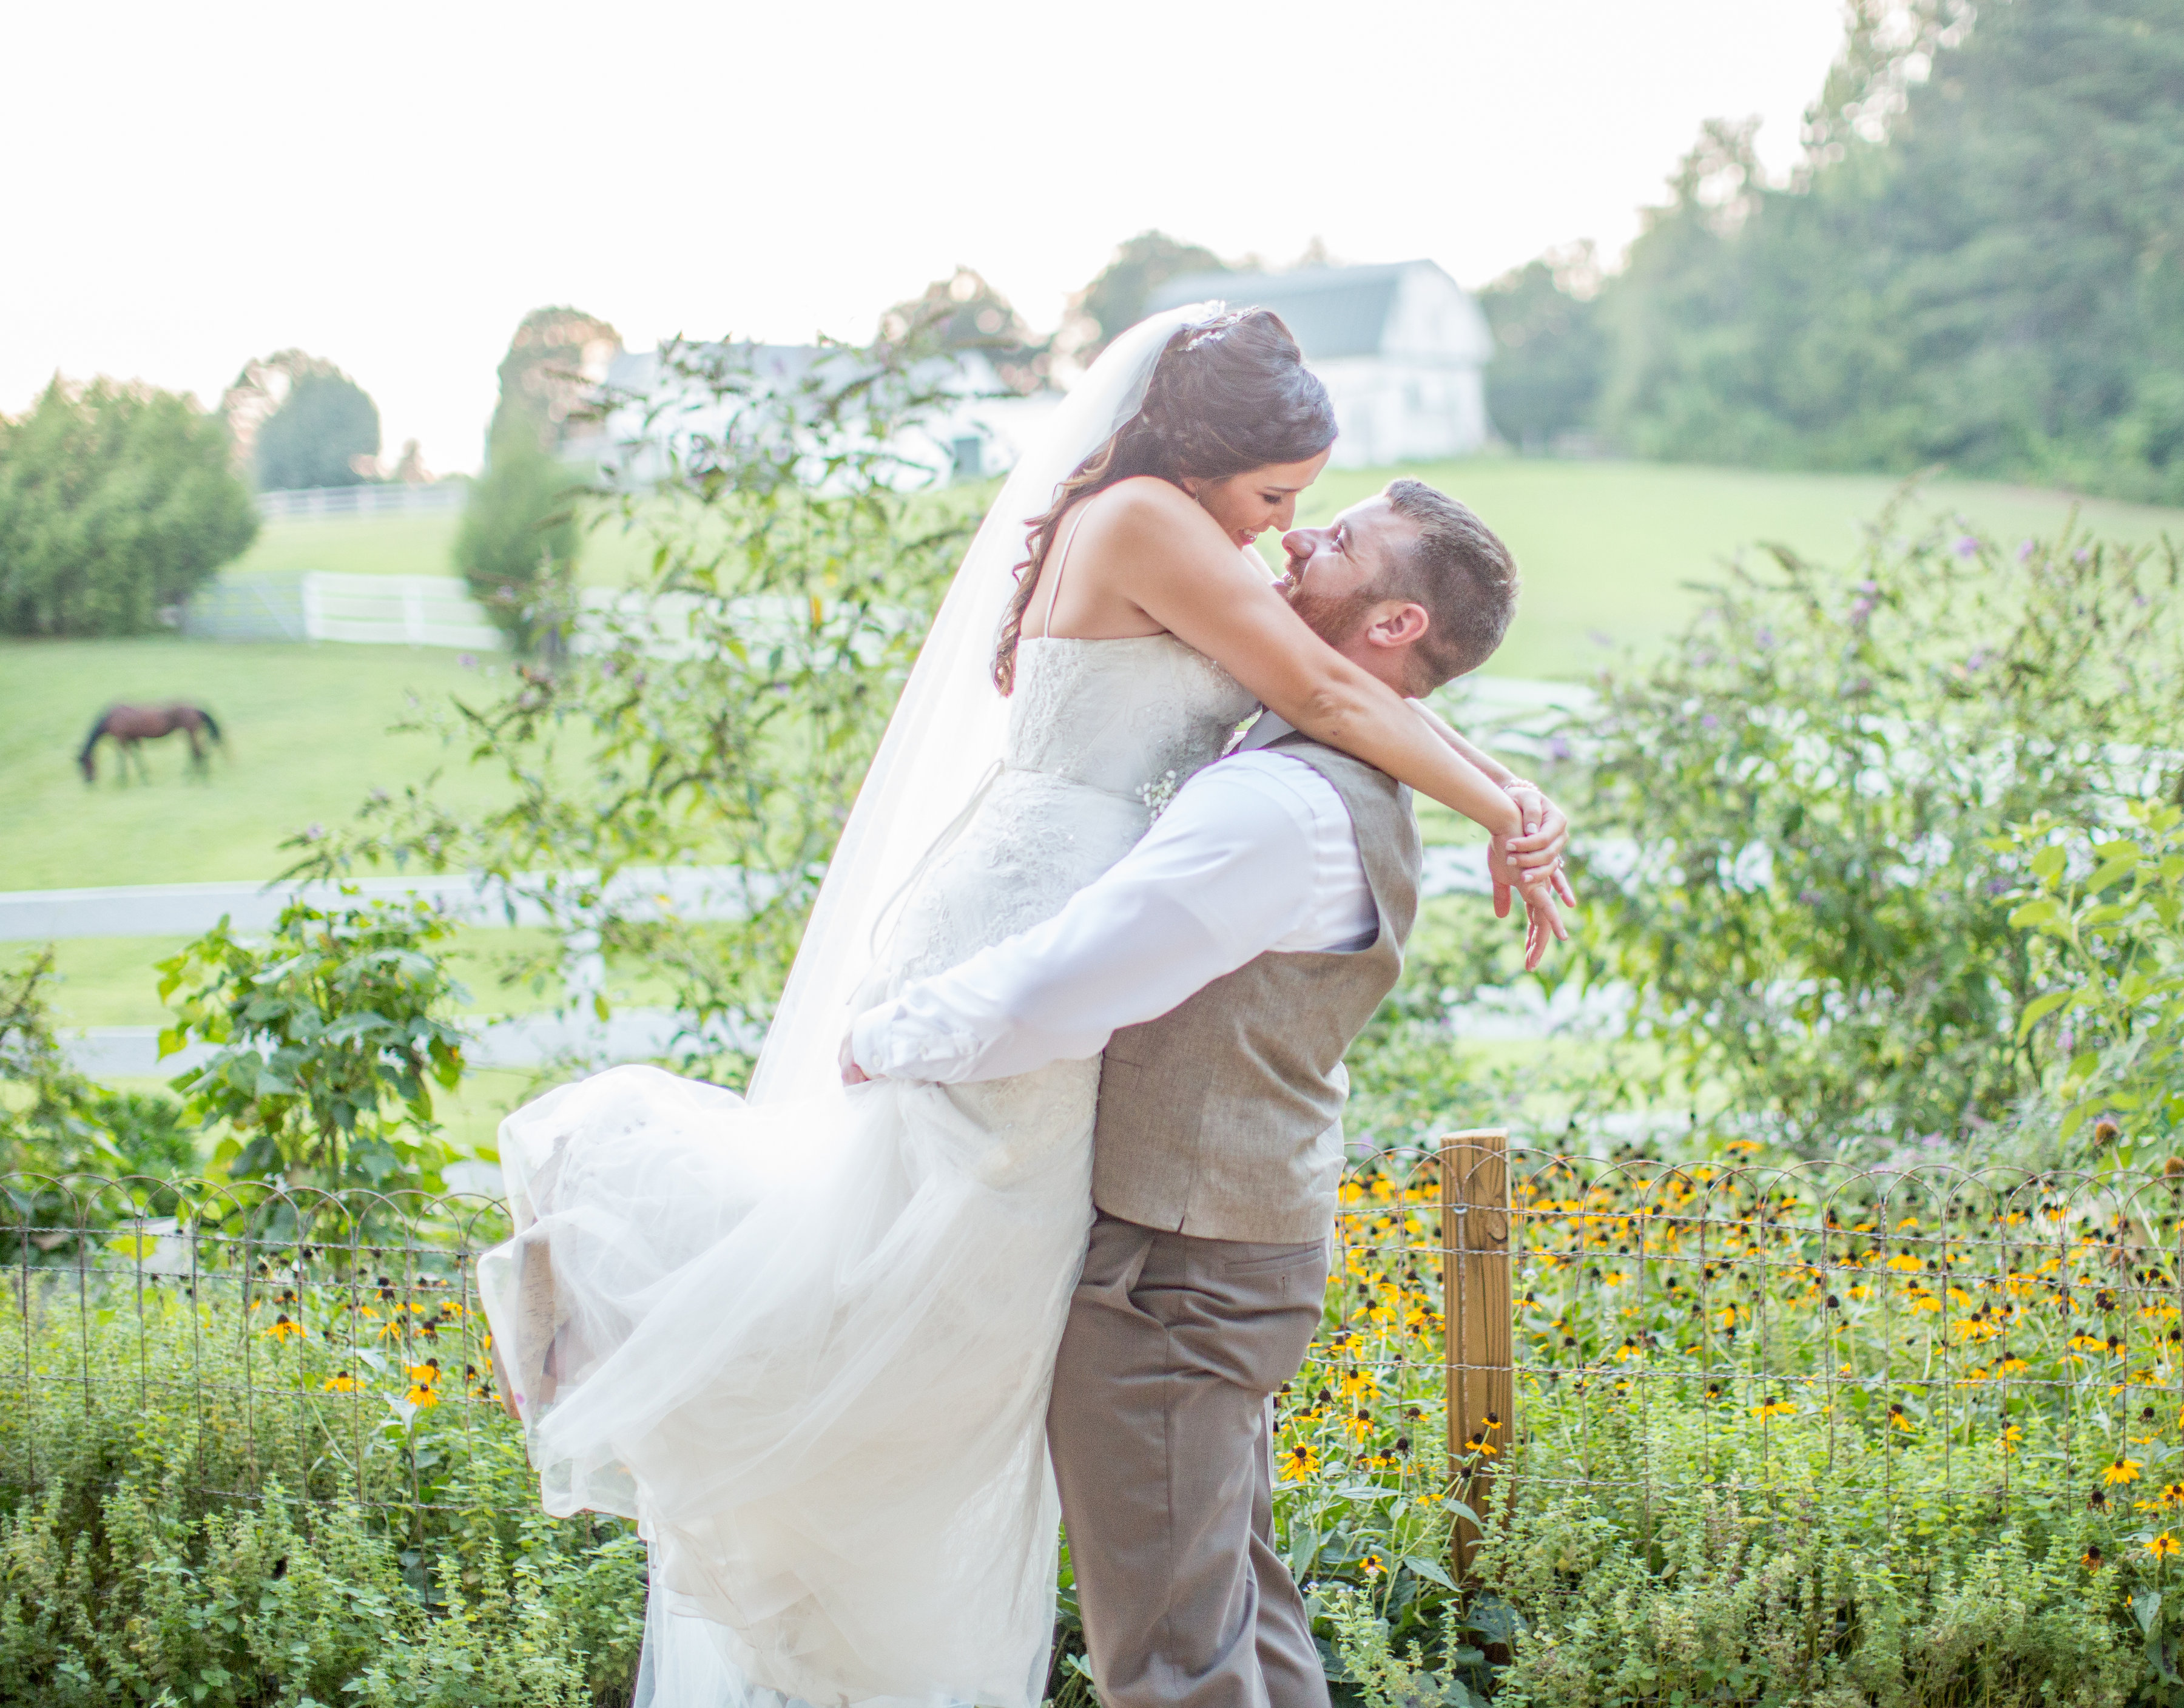 Standing in front of the flowers, groom lifts bride.